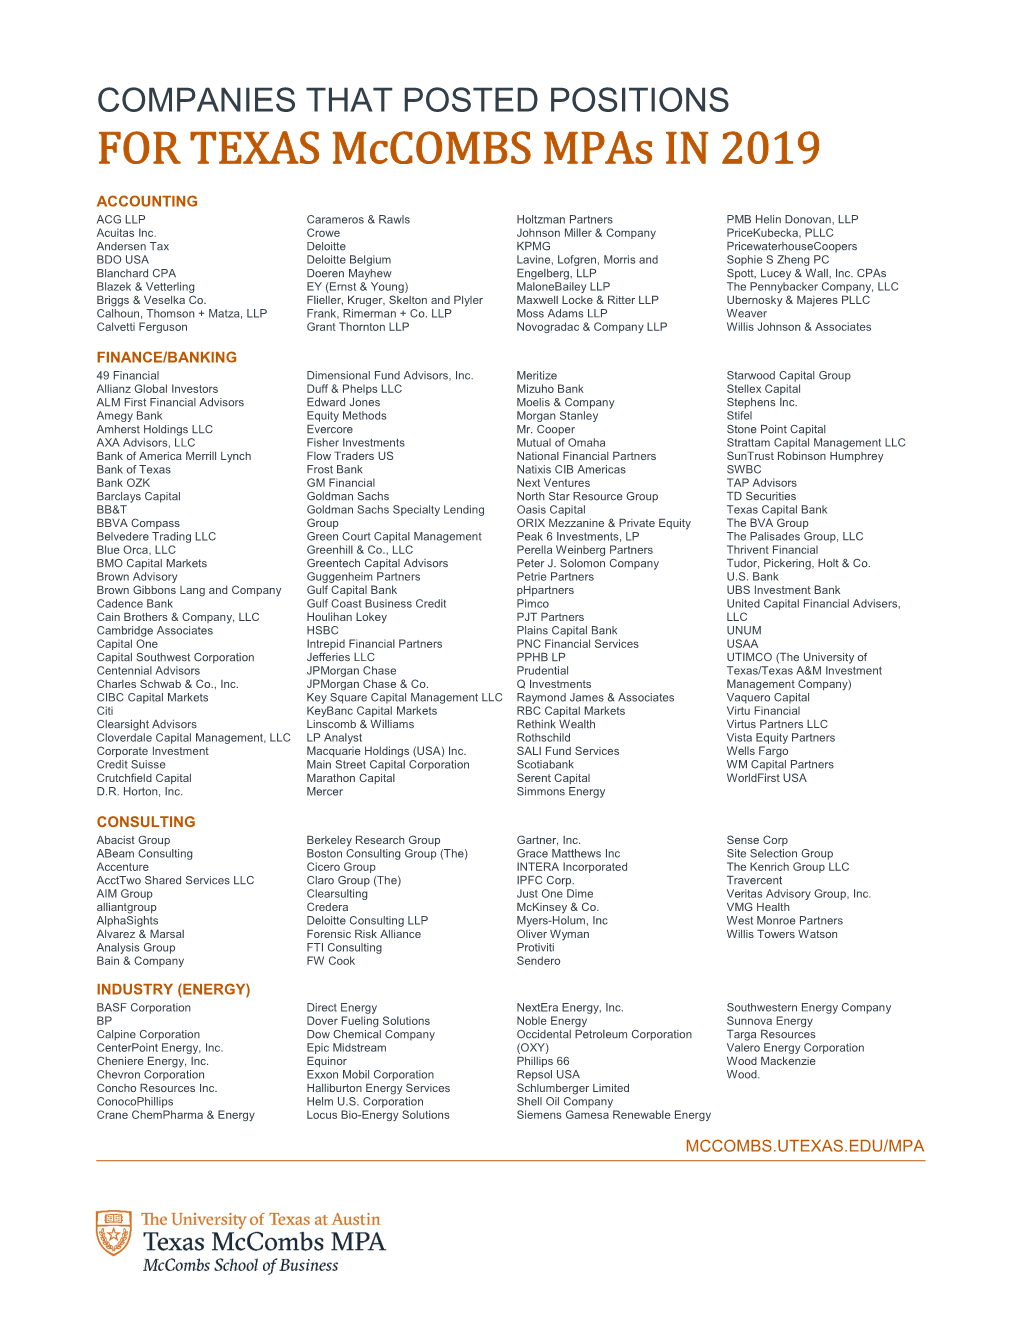 FOR TEXAS Mccombs Mpas in 2019